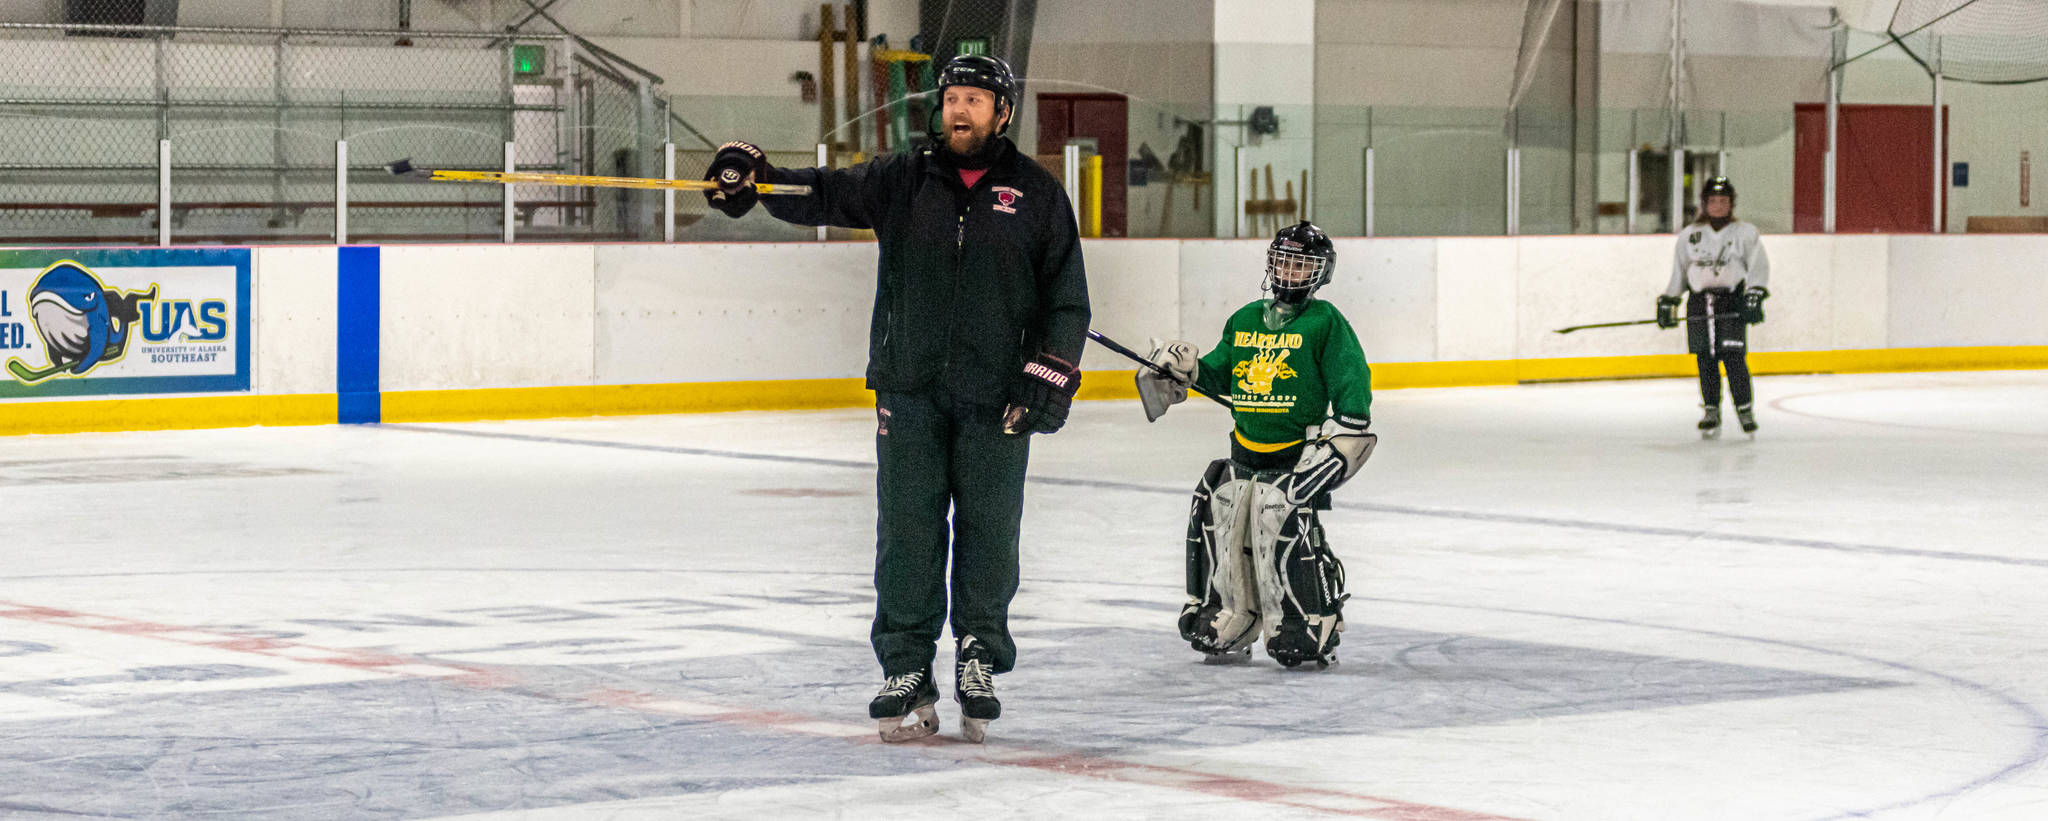 Matt Boline delivers instructions for an upcoming drill during a recent workout with players in the 12-and-under group workout at Treadwell Ice Arena. (Courtesy Photo / Steve Quinn)